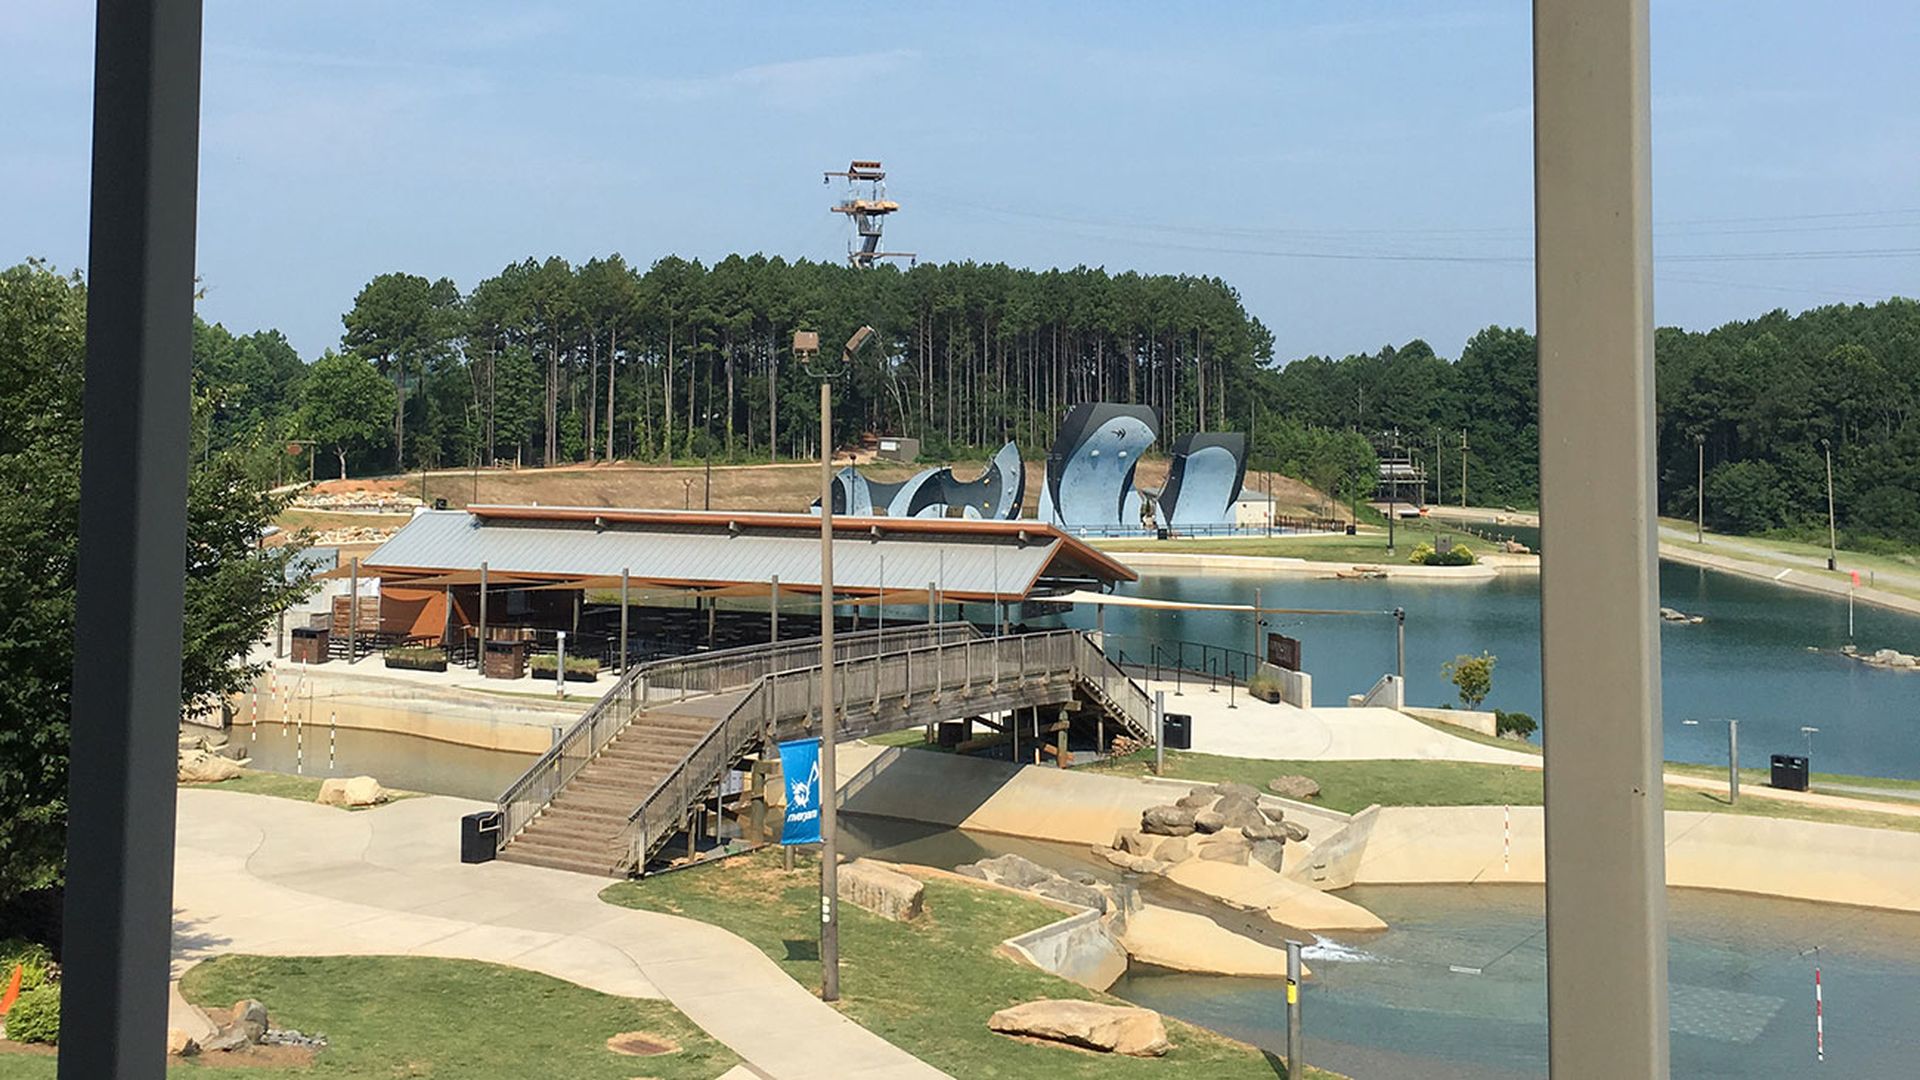 The Whitewater Center Should Invest In